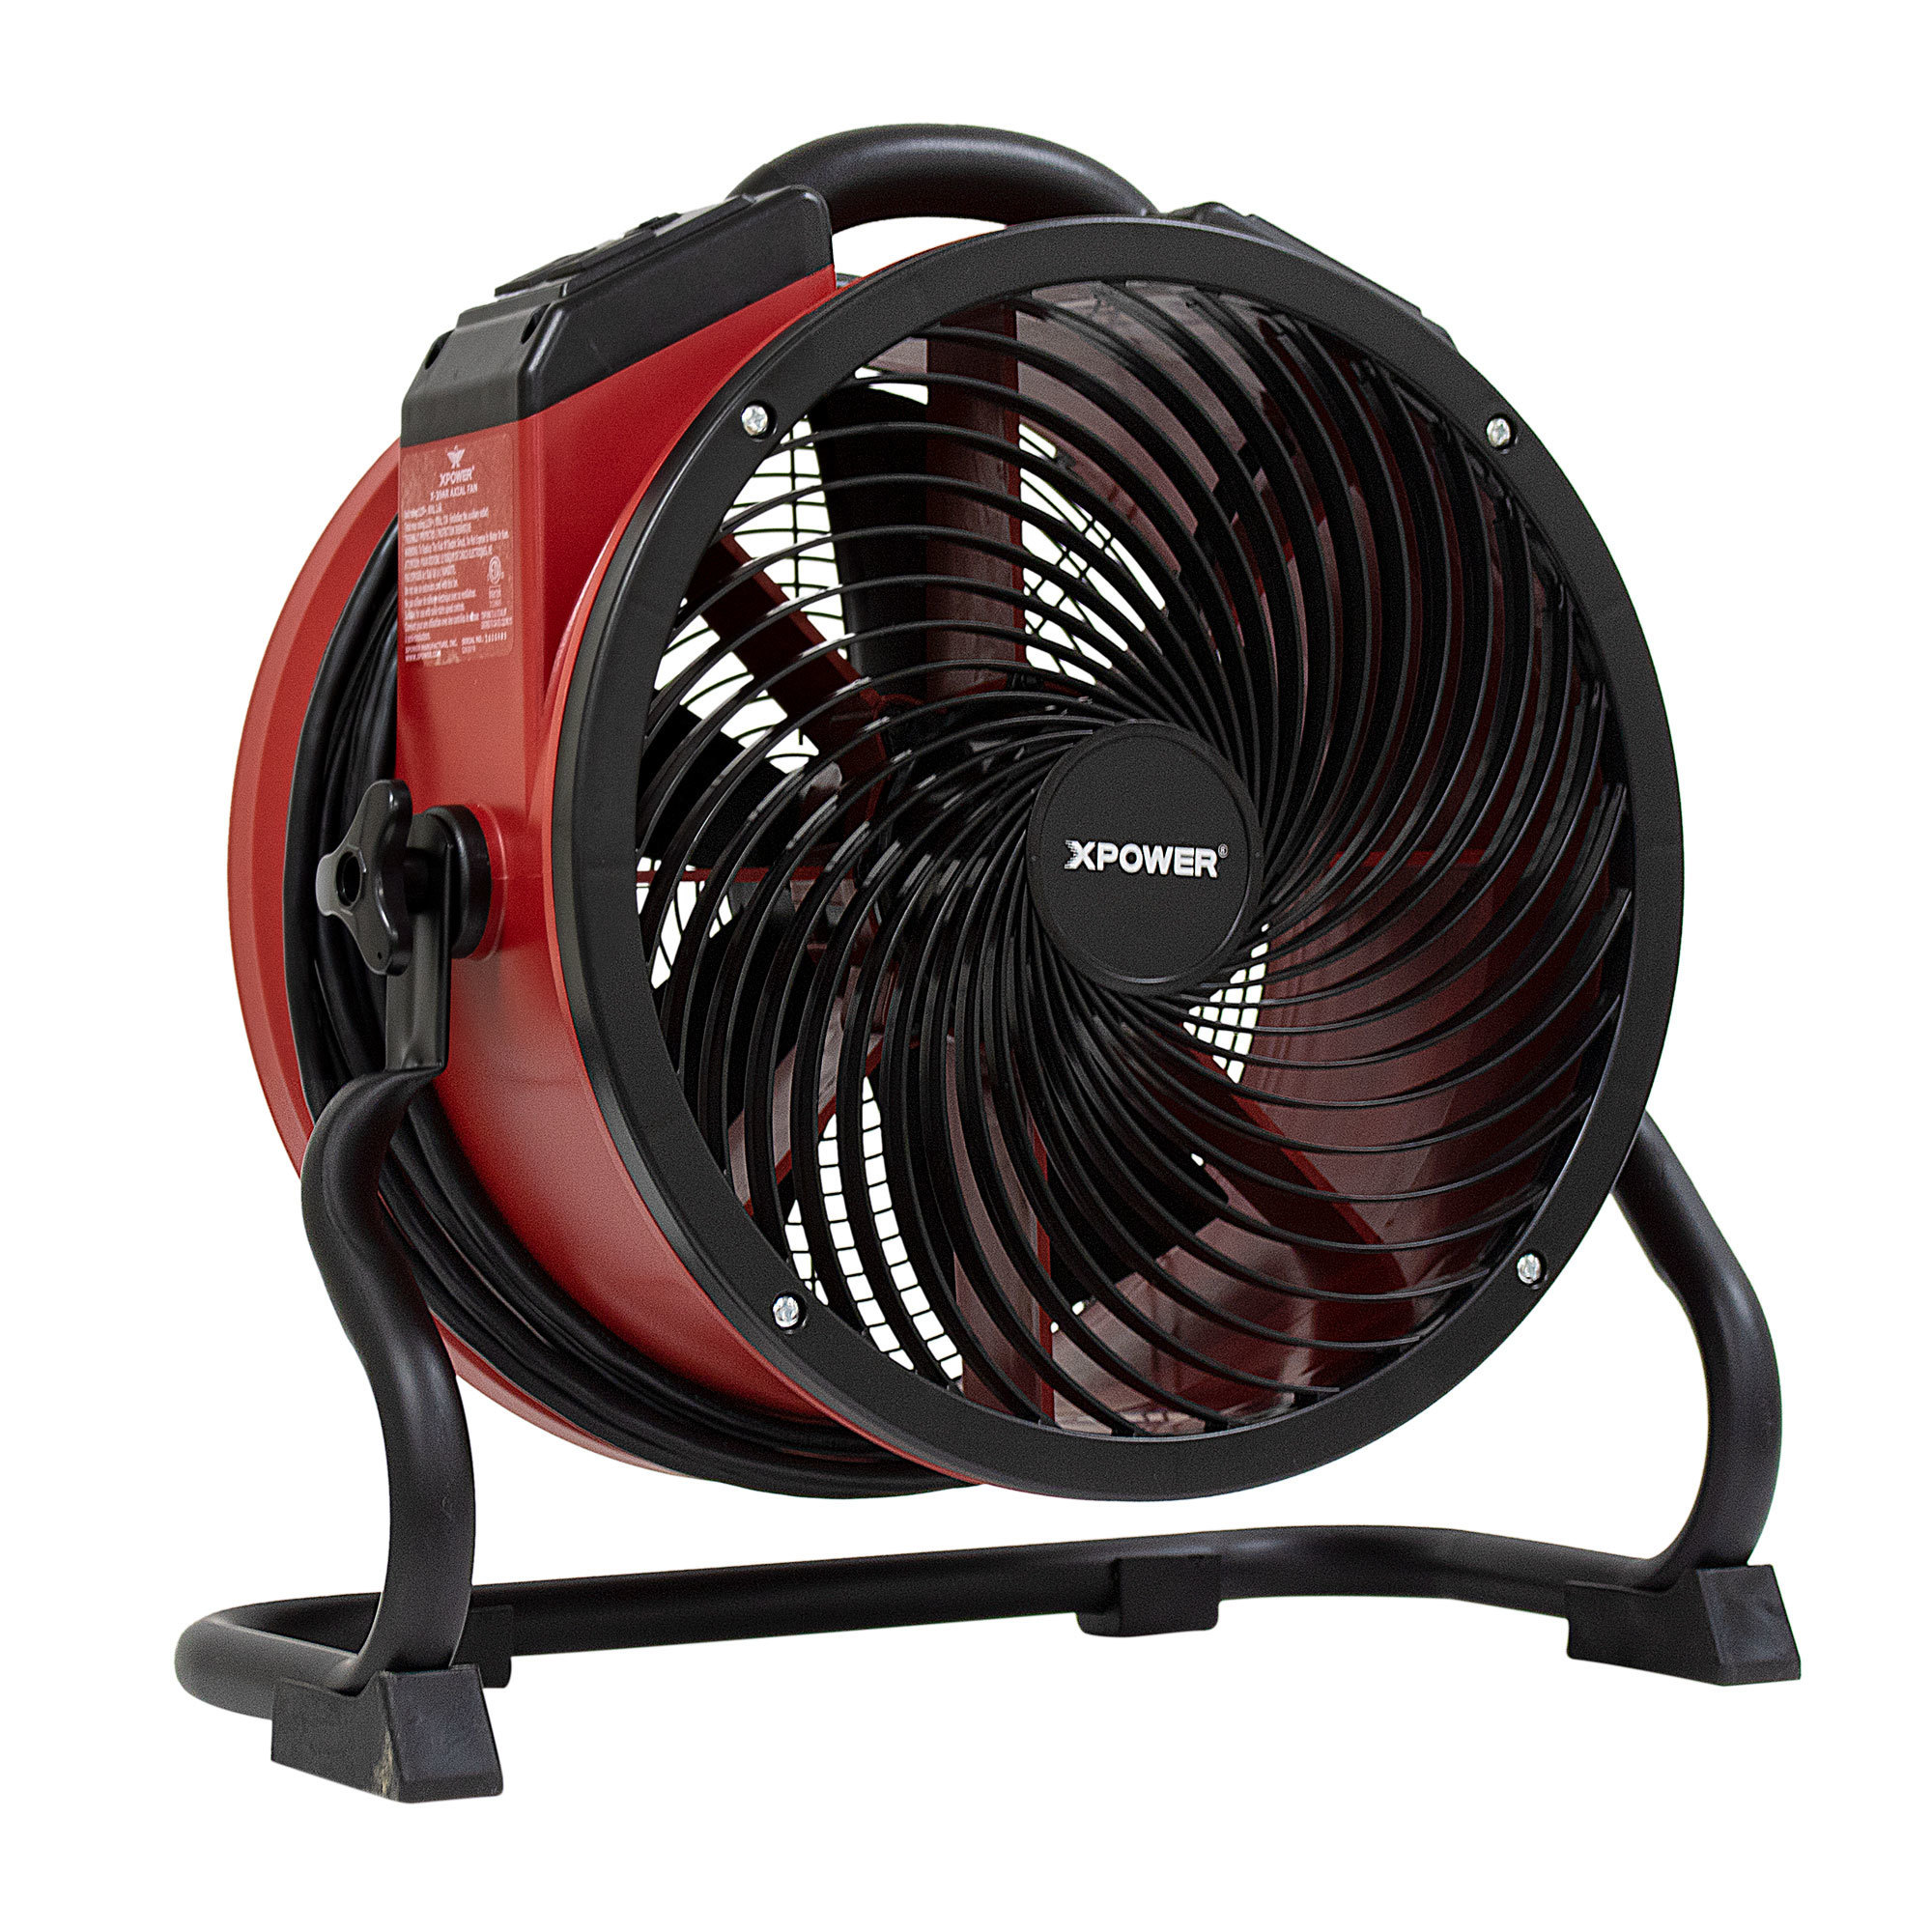 XPOWER, 1/4 HP Axial Air Mover Fan w/ Power Outlets - Red, Fan Type Carpet Blowers, Fan Diameter 14 in, Air Delivery 2100 cfm, Model X-39AR-Red